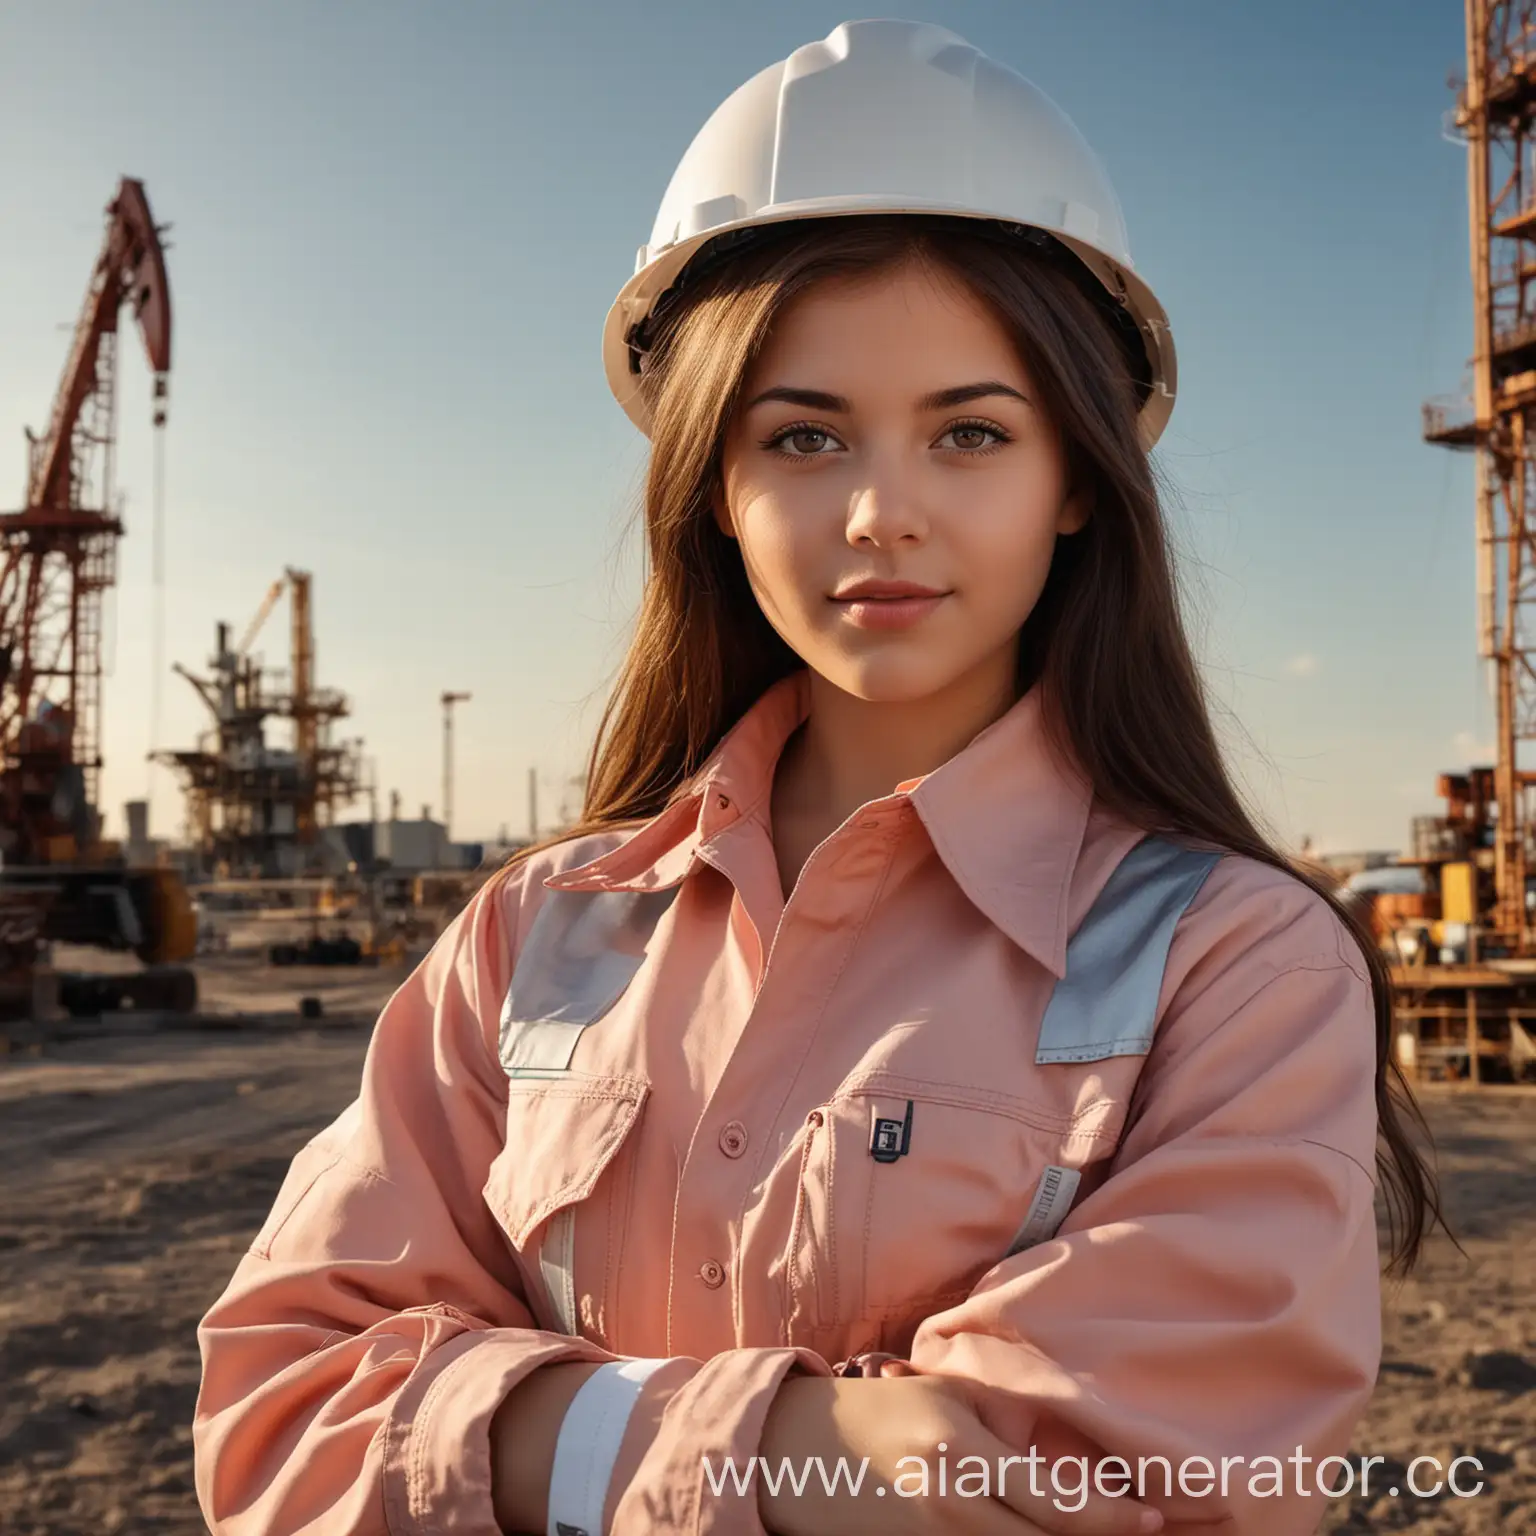 Intelligent-Brunette-Woman-in-Future-Oil-and-Gas-Industry